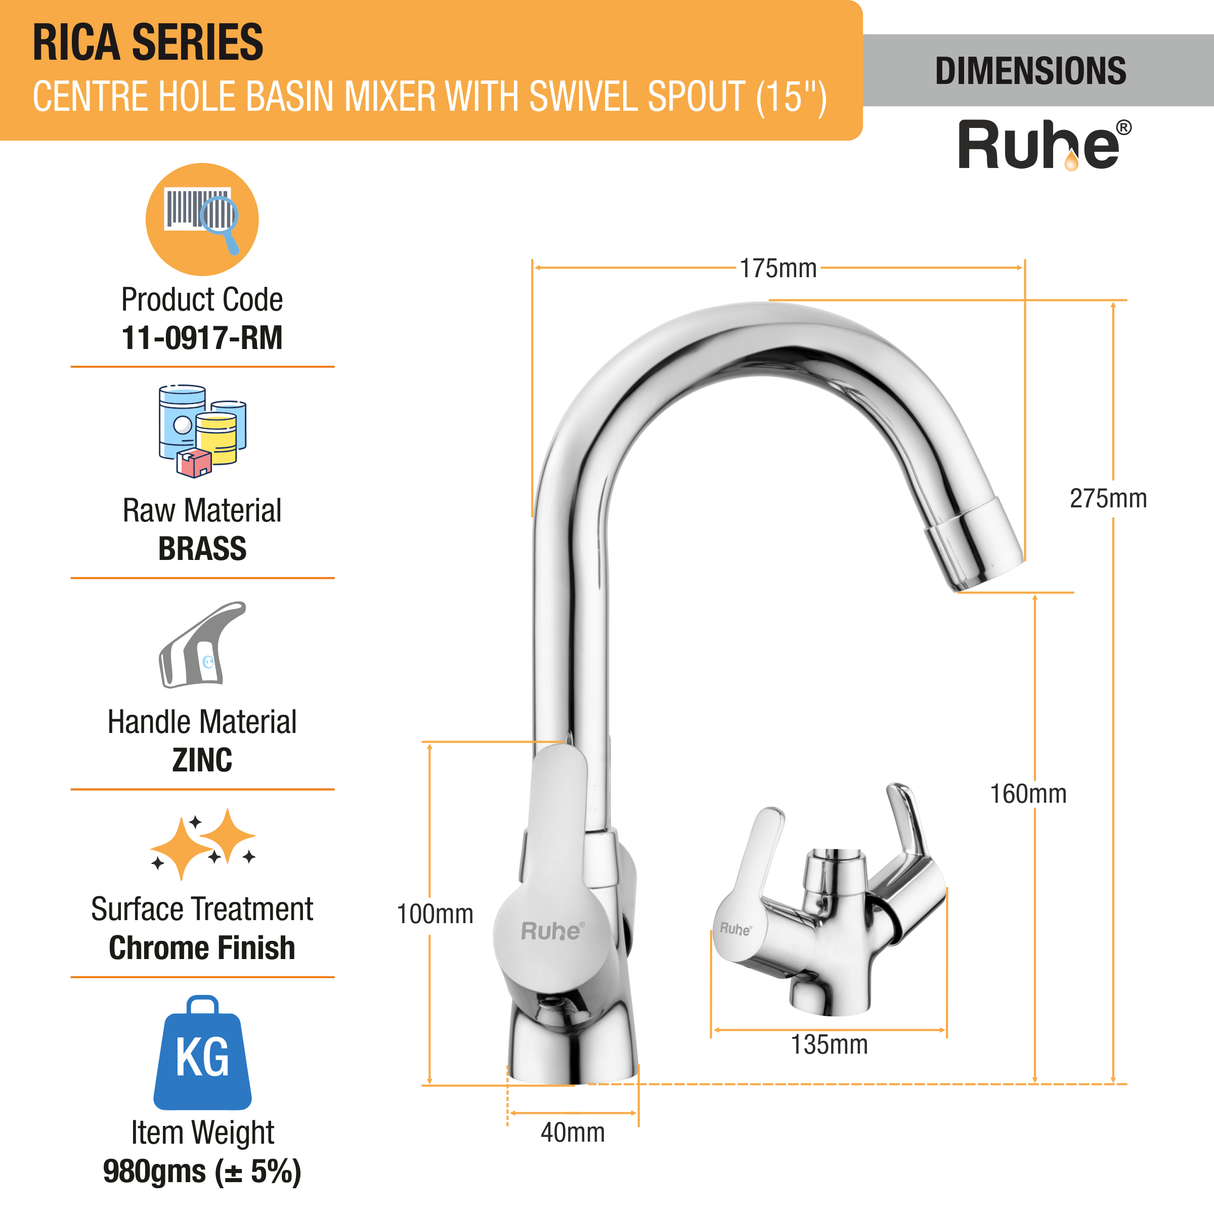 Rica Centre Hole Basin Mixer with Medium (15 inches) Round Swivel Spout Faucet sizes